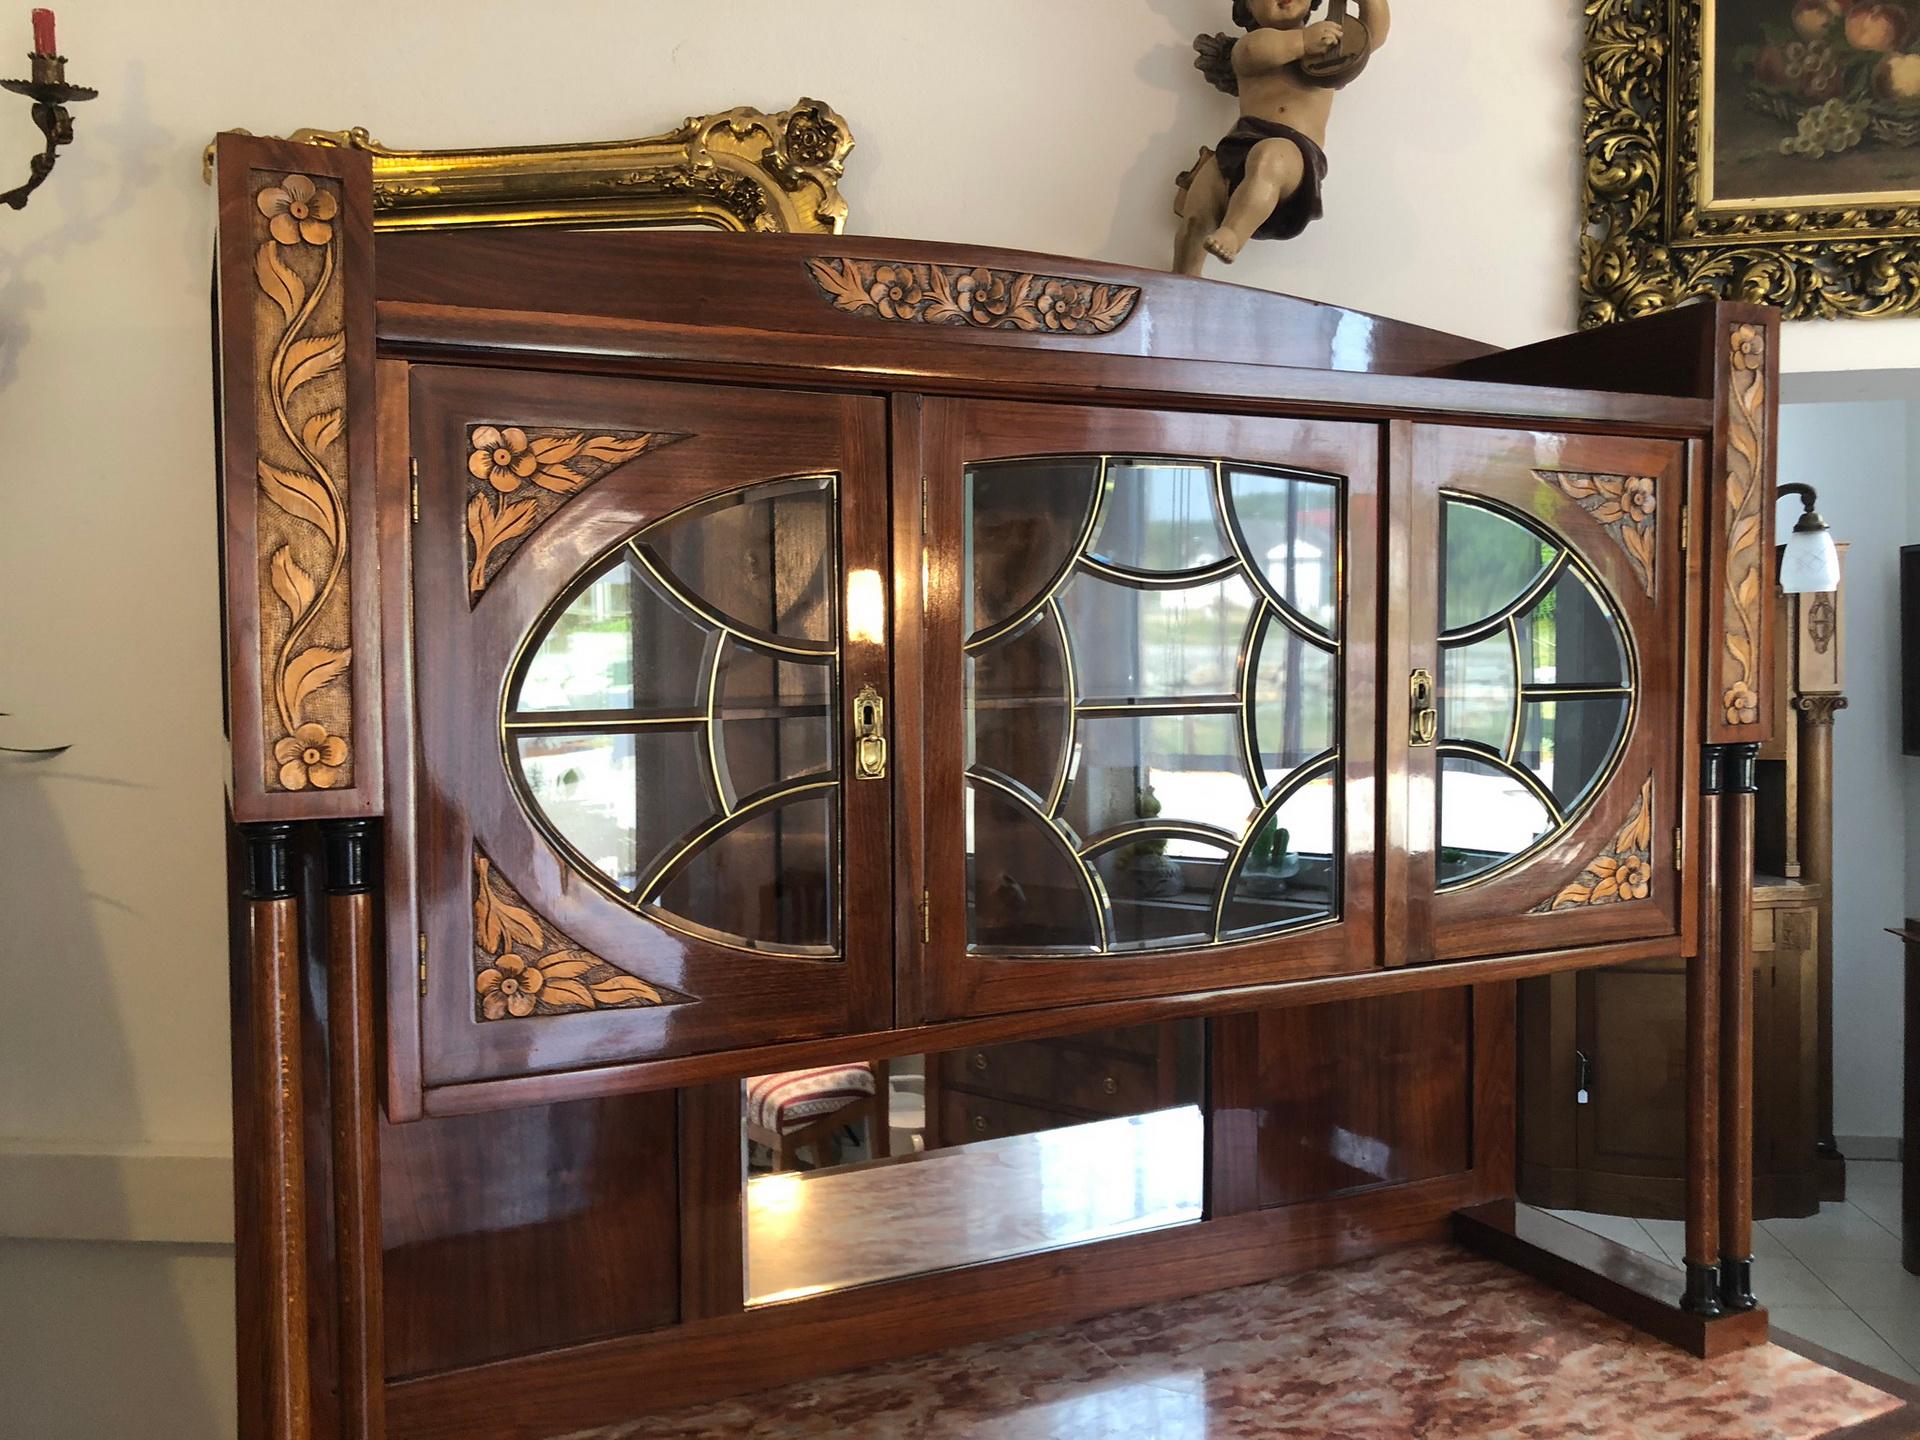 Austrian Floral Jugendstil Vienna Secession Buffet Cabinet from the 1920s For Sale